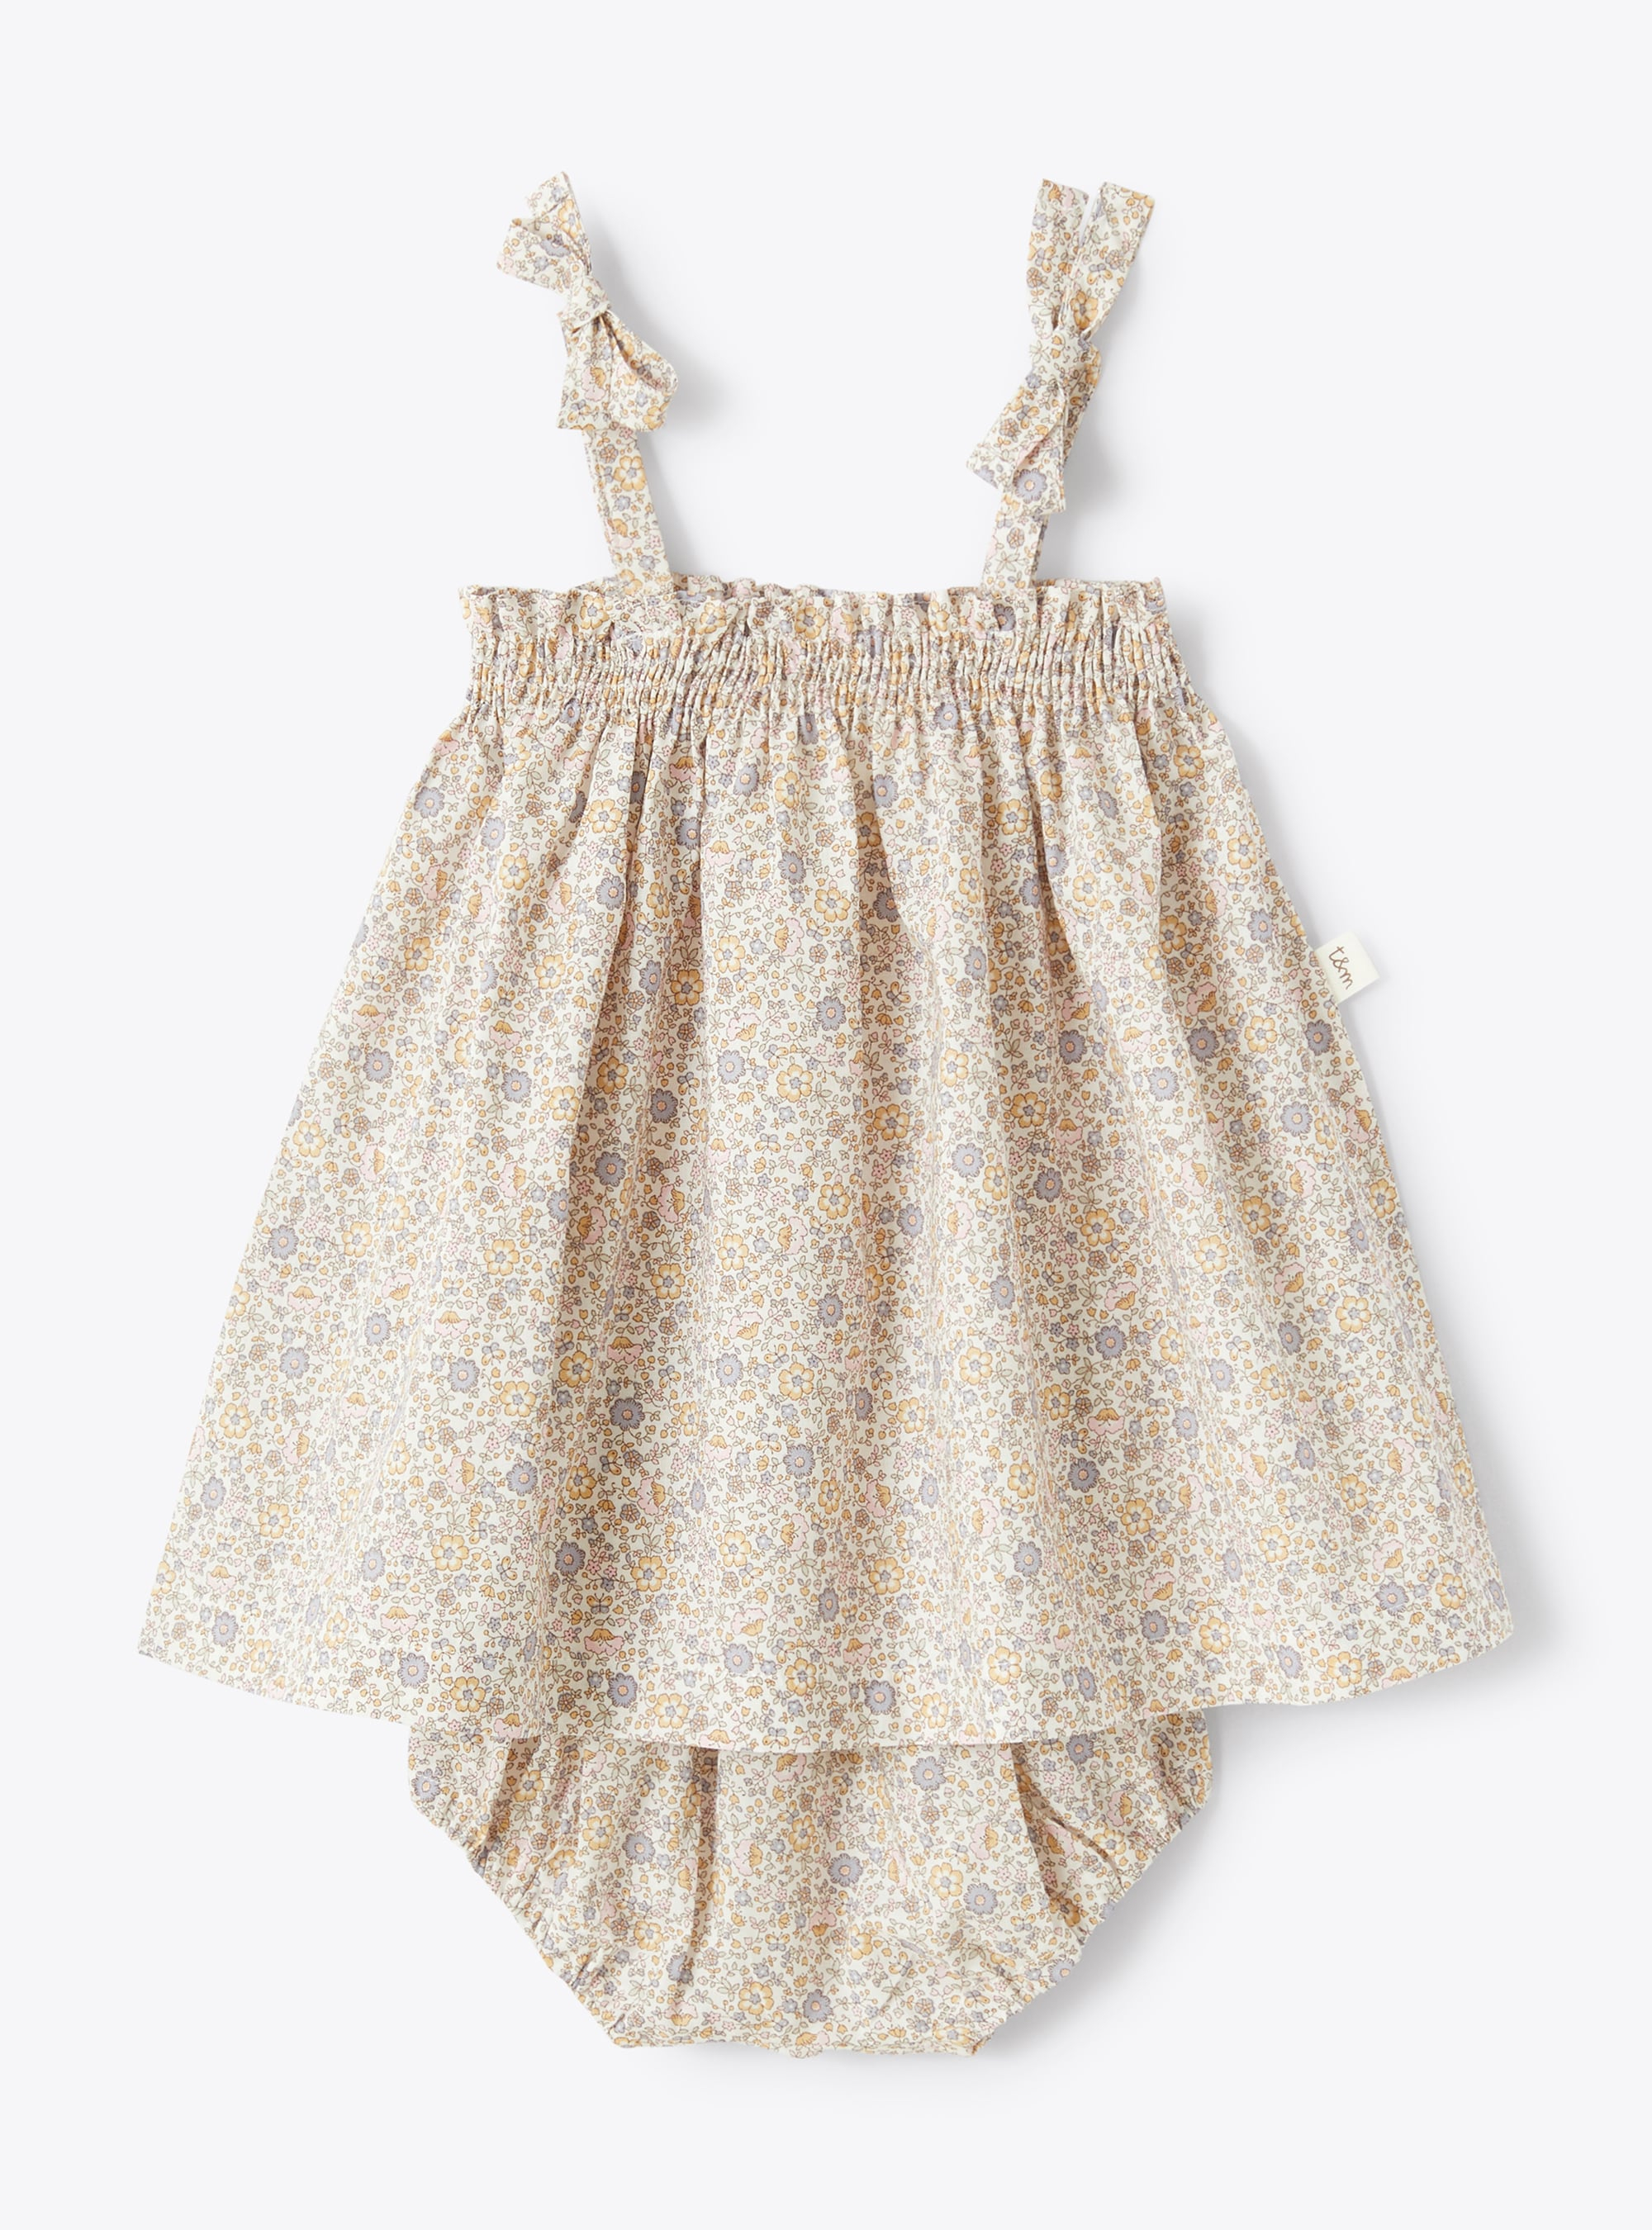 Dress in floral-patterned cotton - Dresses - Il Gufo